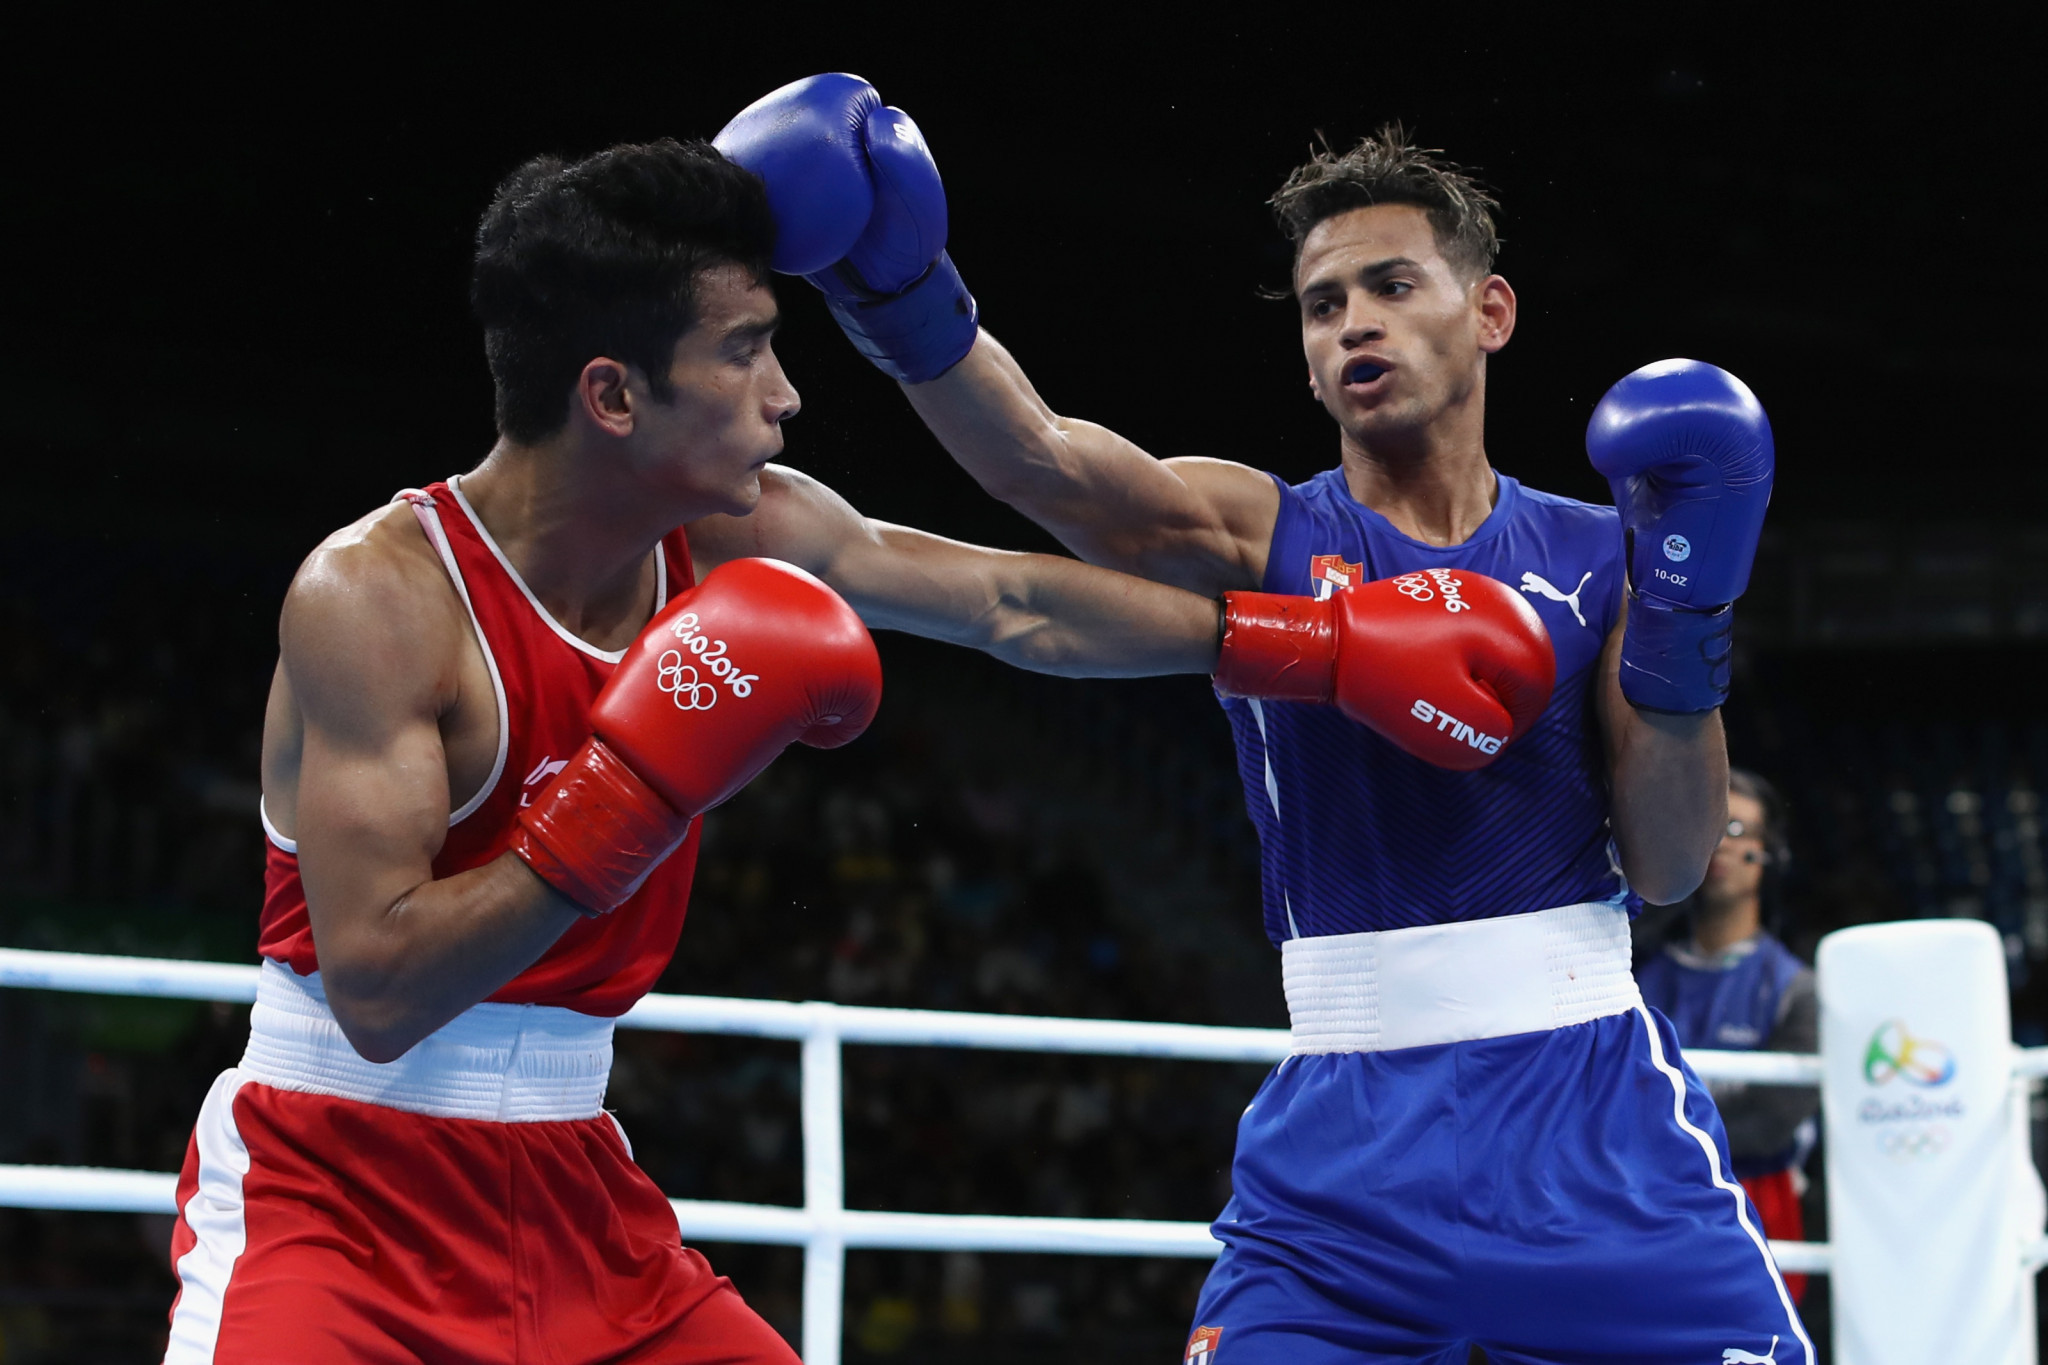 World Championships bronze medallist Shiva Thapa of India progressed to the last 16 of the men's lightweight division ©Getty Images